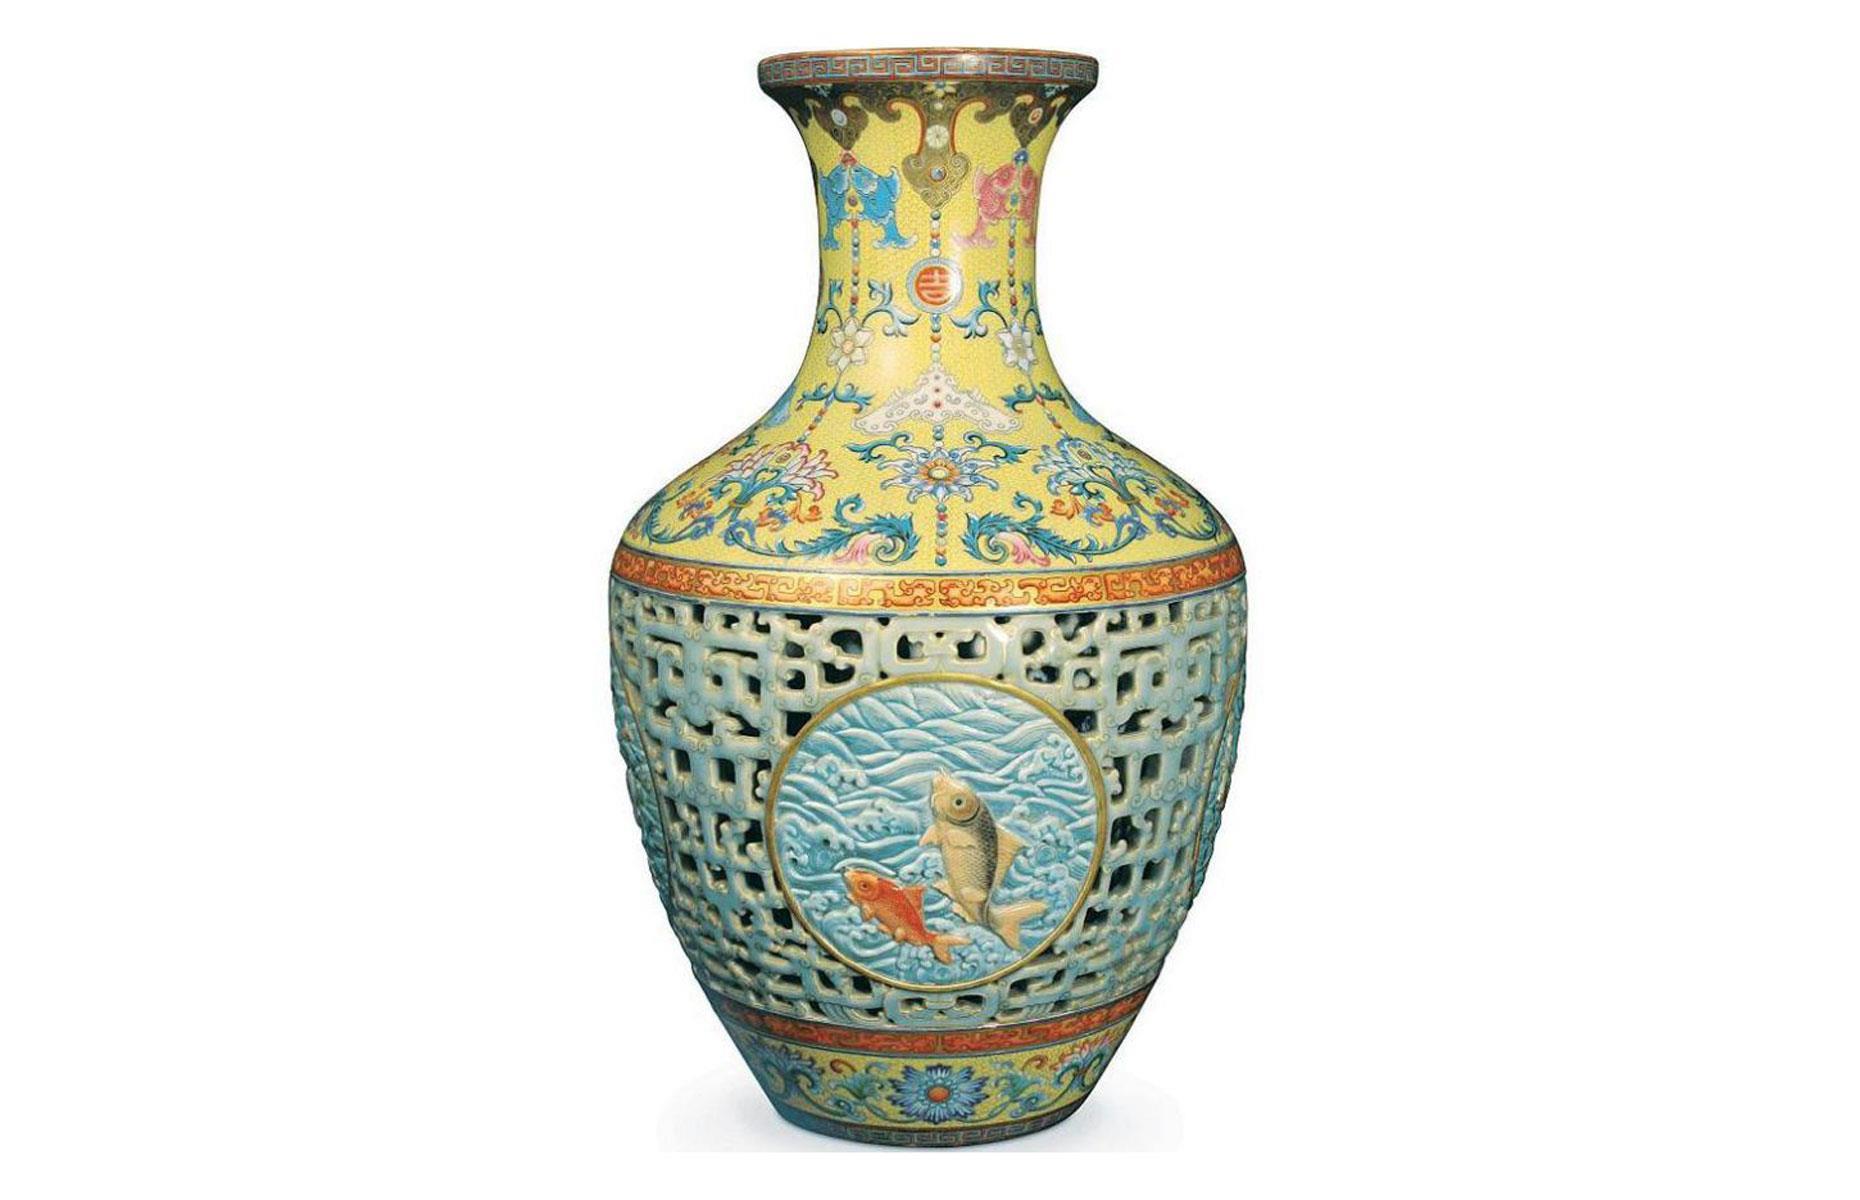 The exquisite Ming vases used as umbrella stands